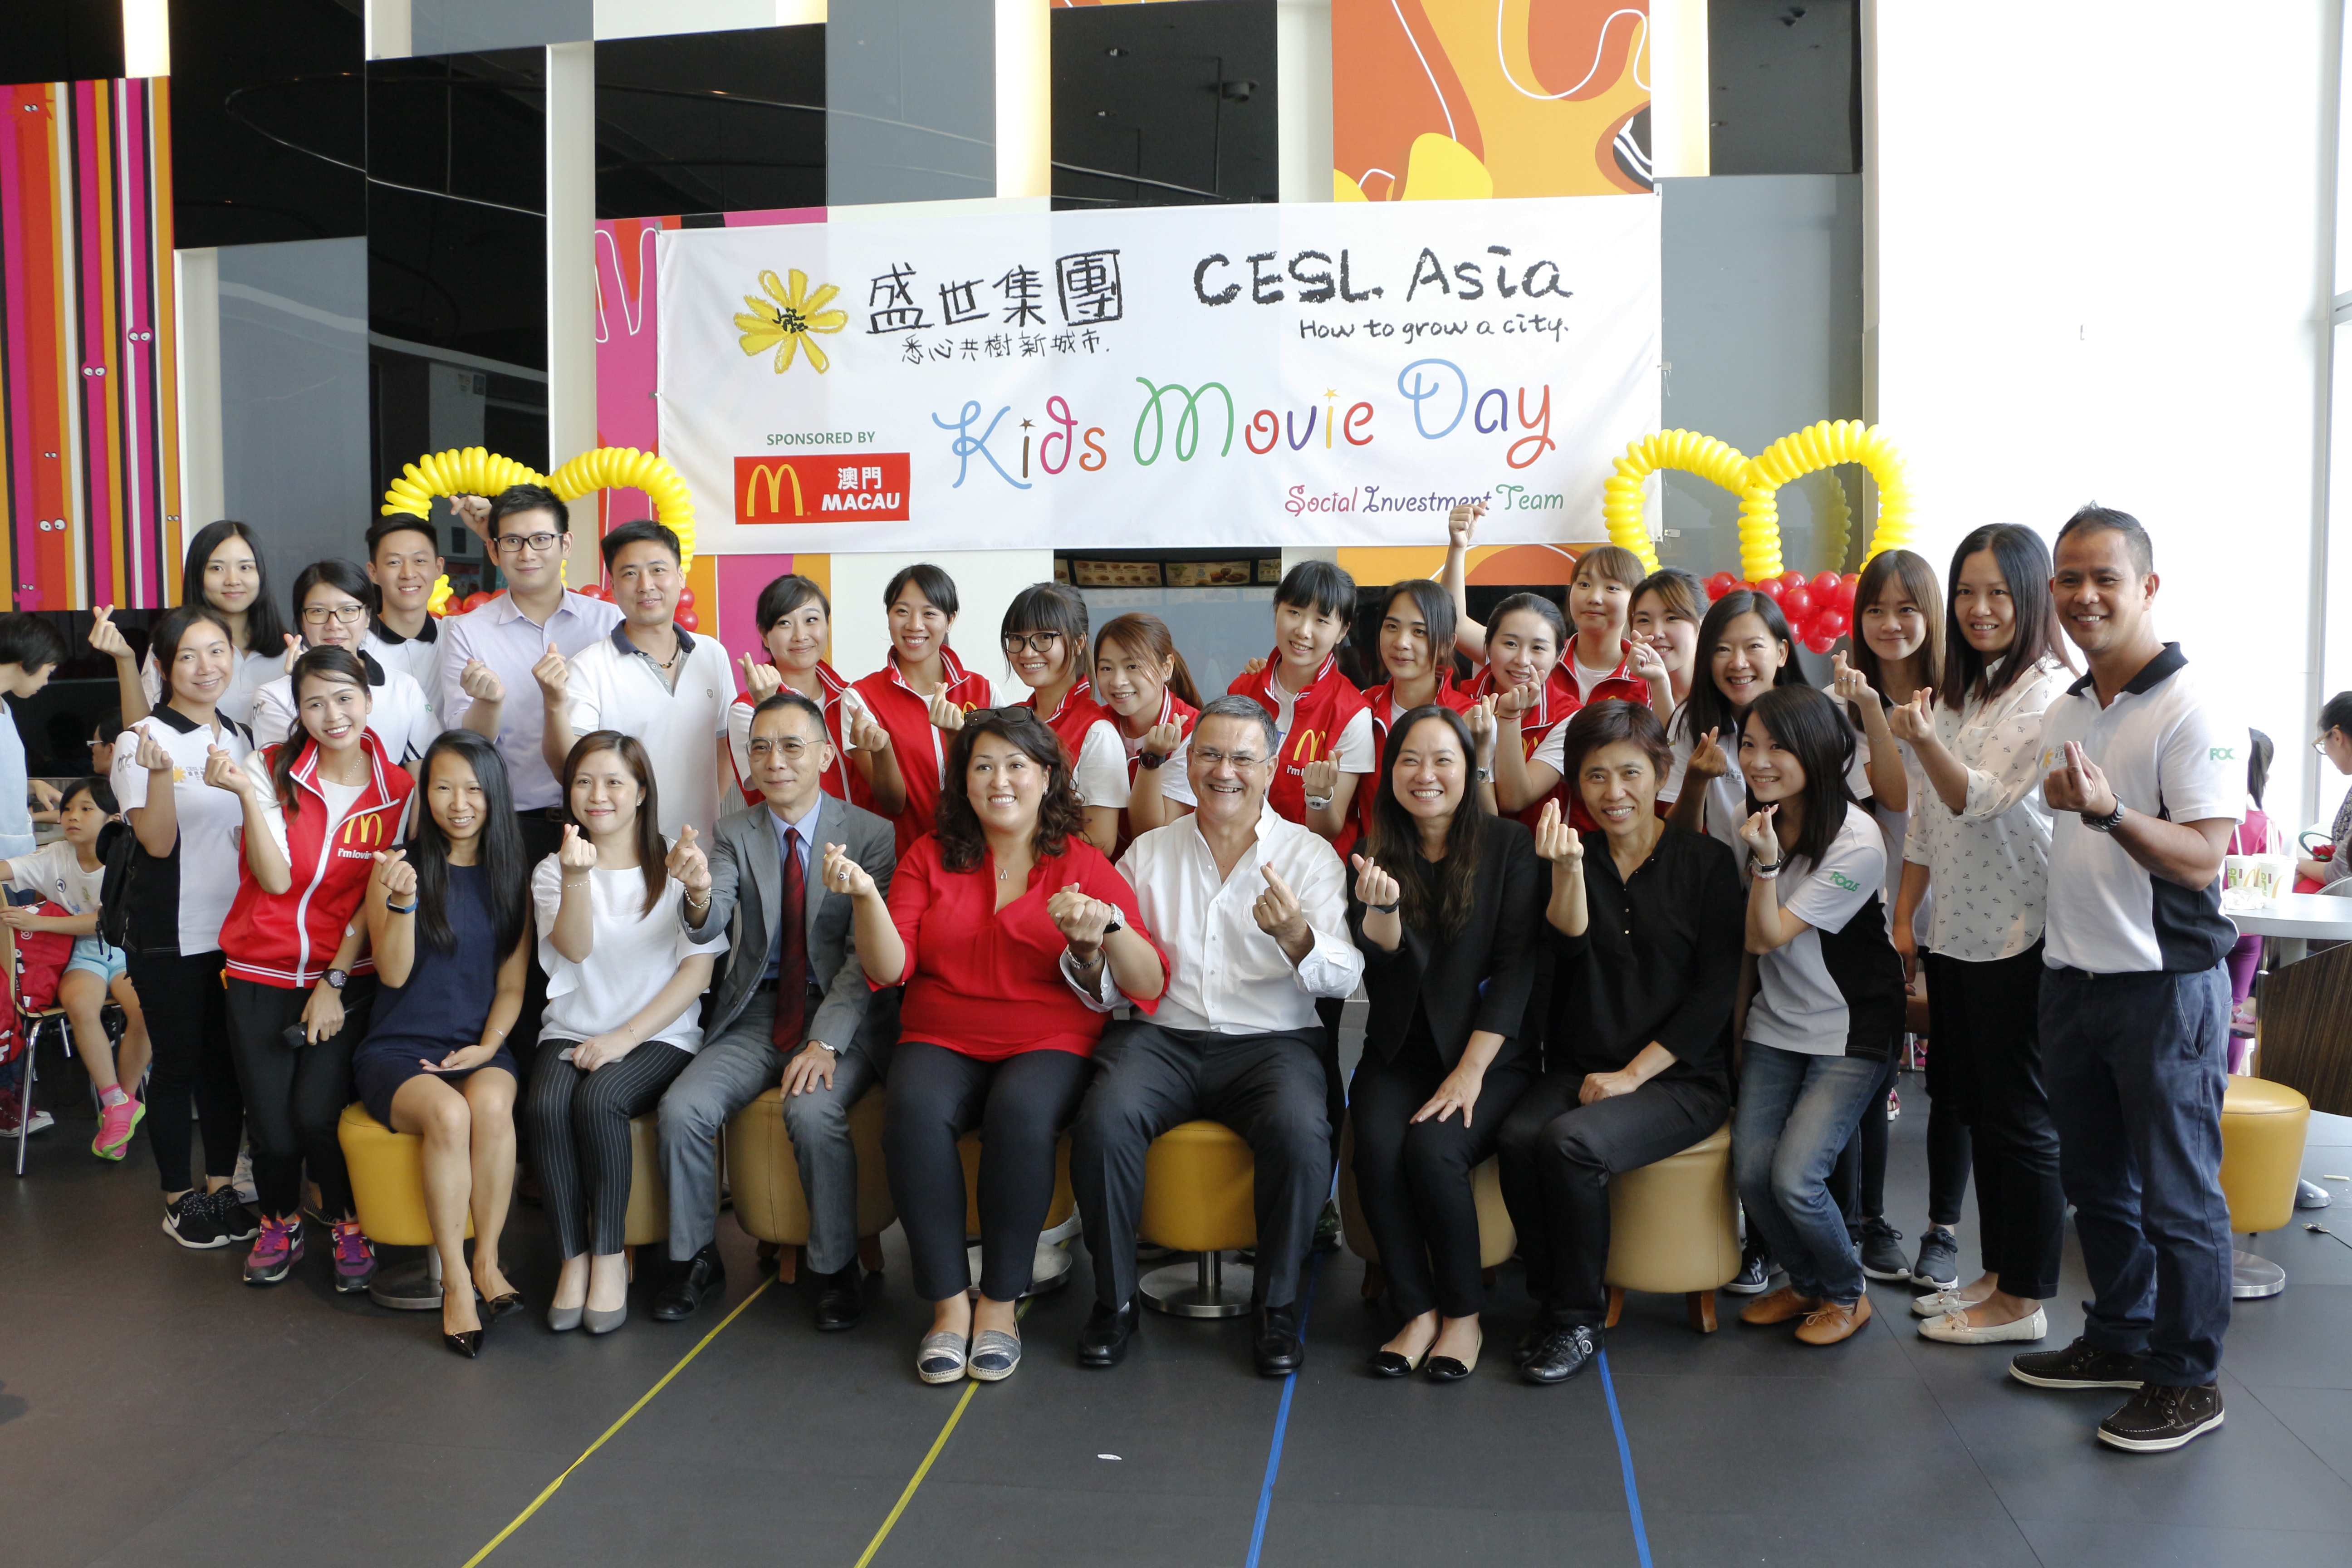 The 6th Consecutive Year of CESL Asia Kids Movie Day